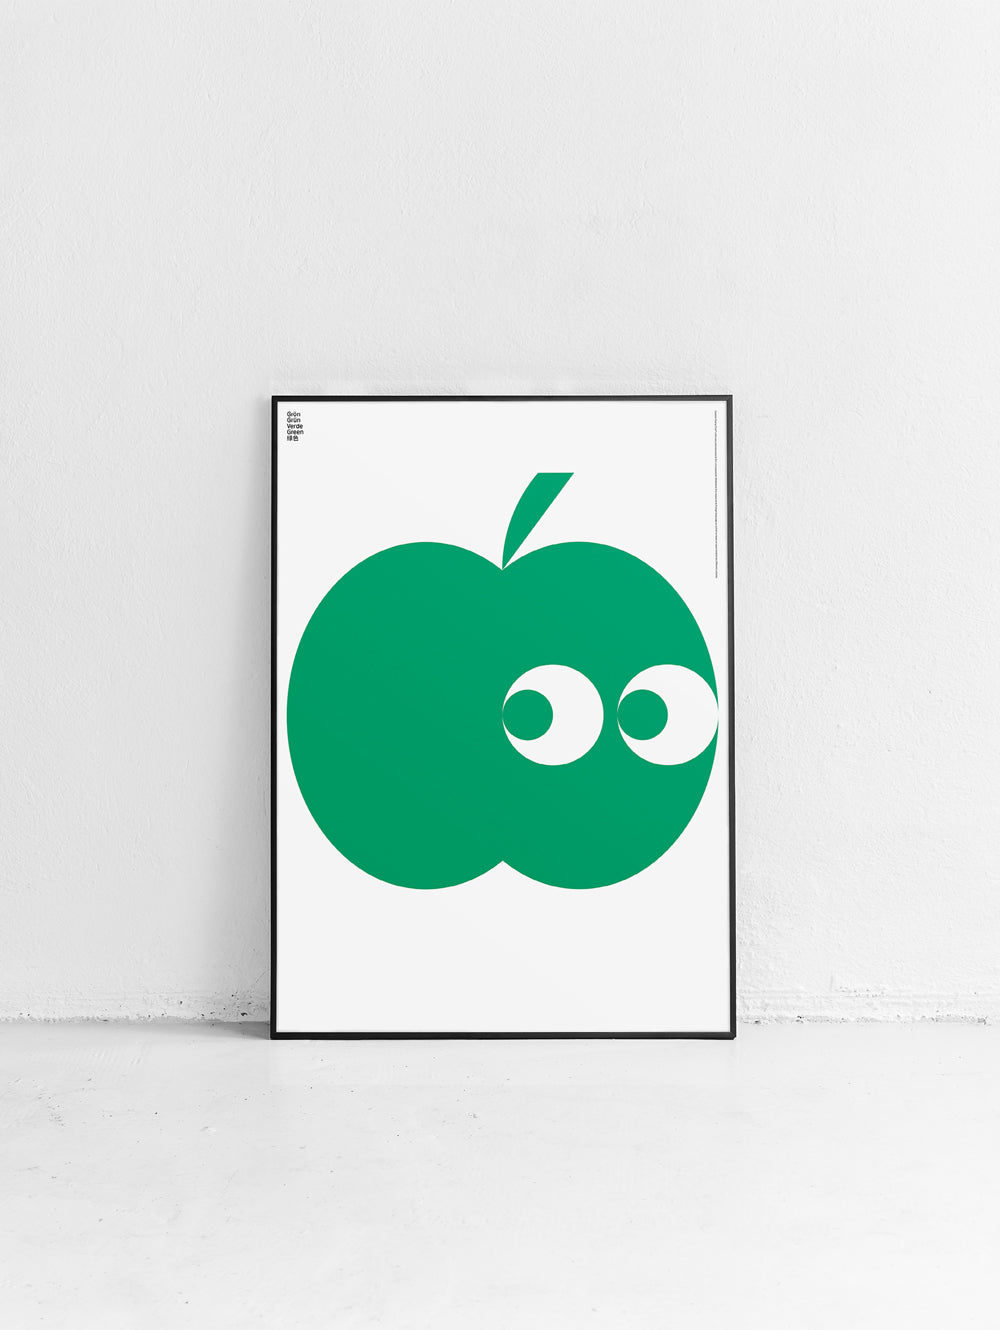 Translated Green Poster (Apple)